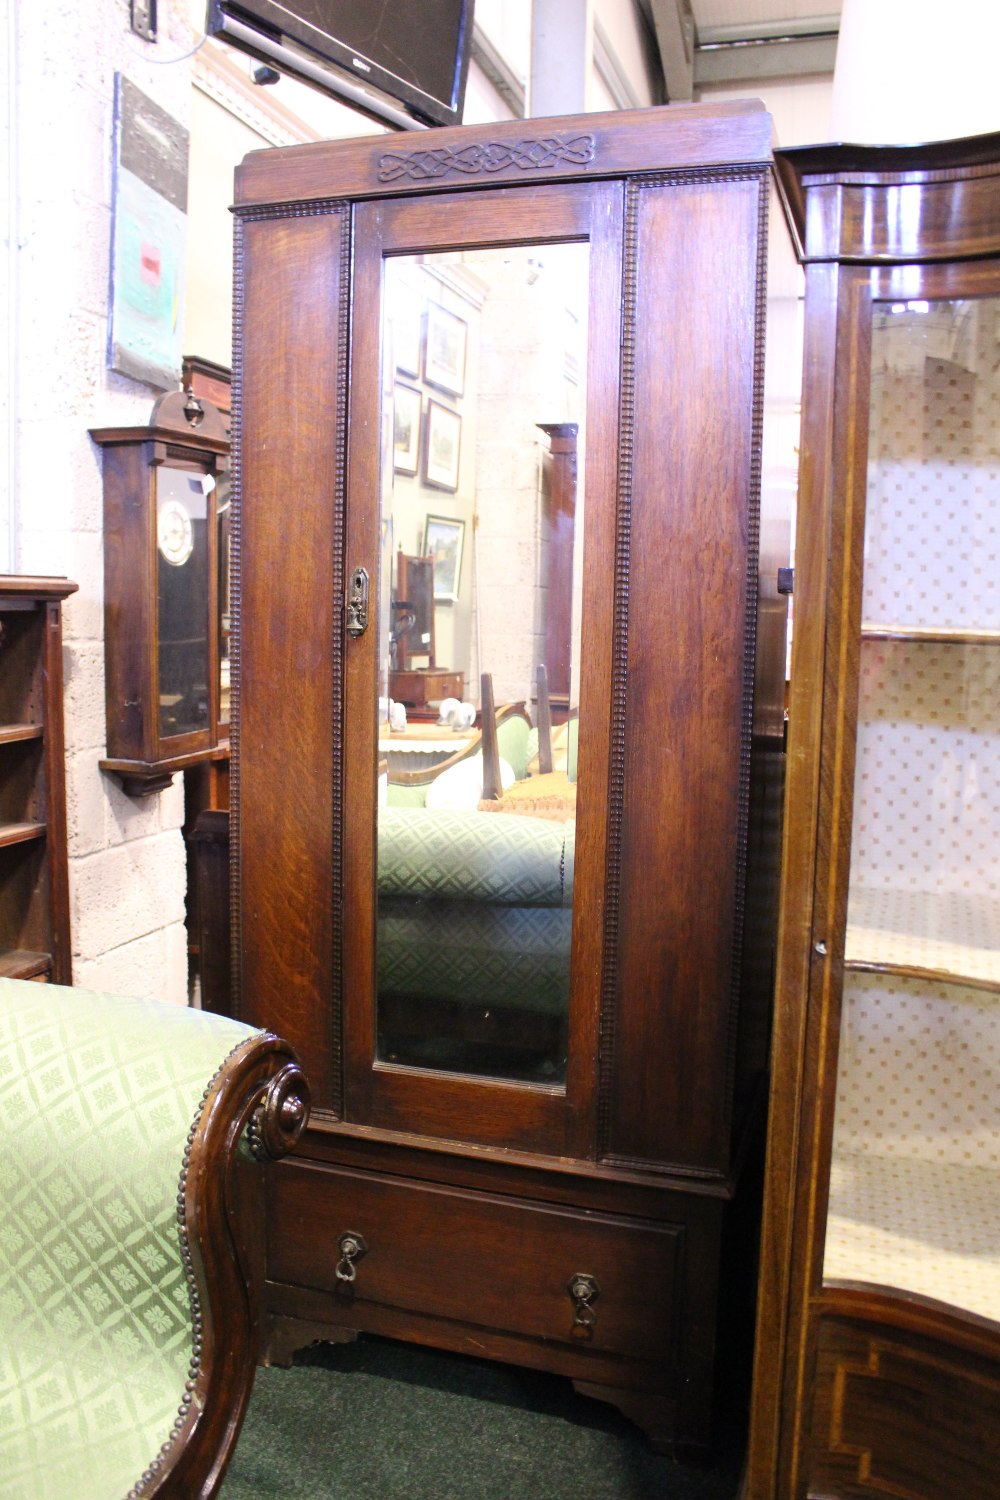 AN EARLY 20TH CENTURY OAK 1 DOOR WARDROBE, with bevelled mirror panel, carved details on a single